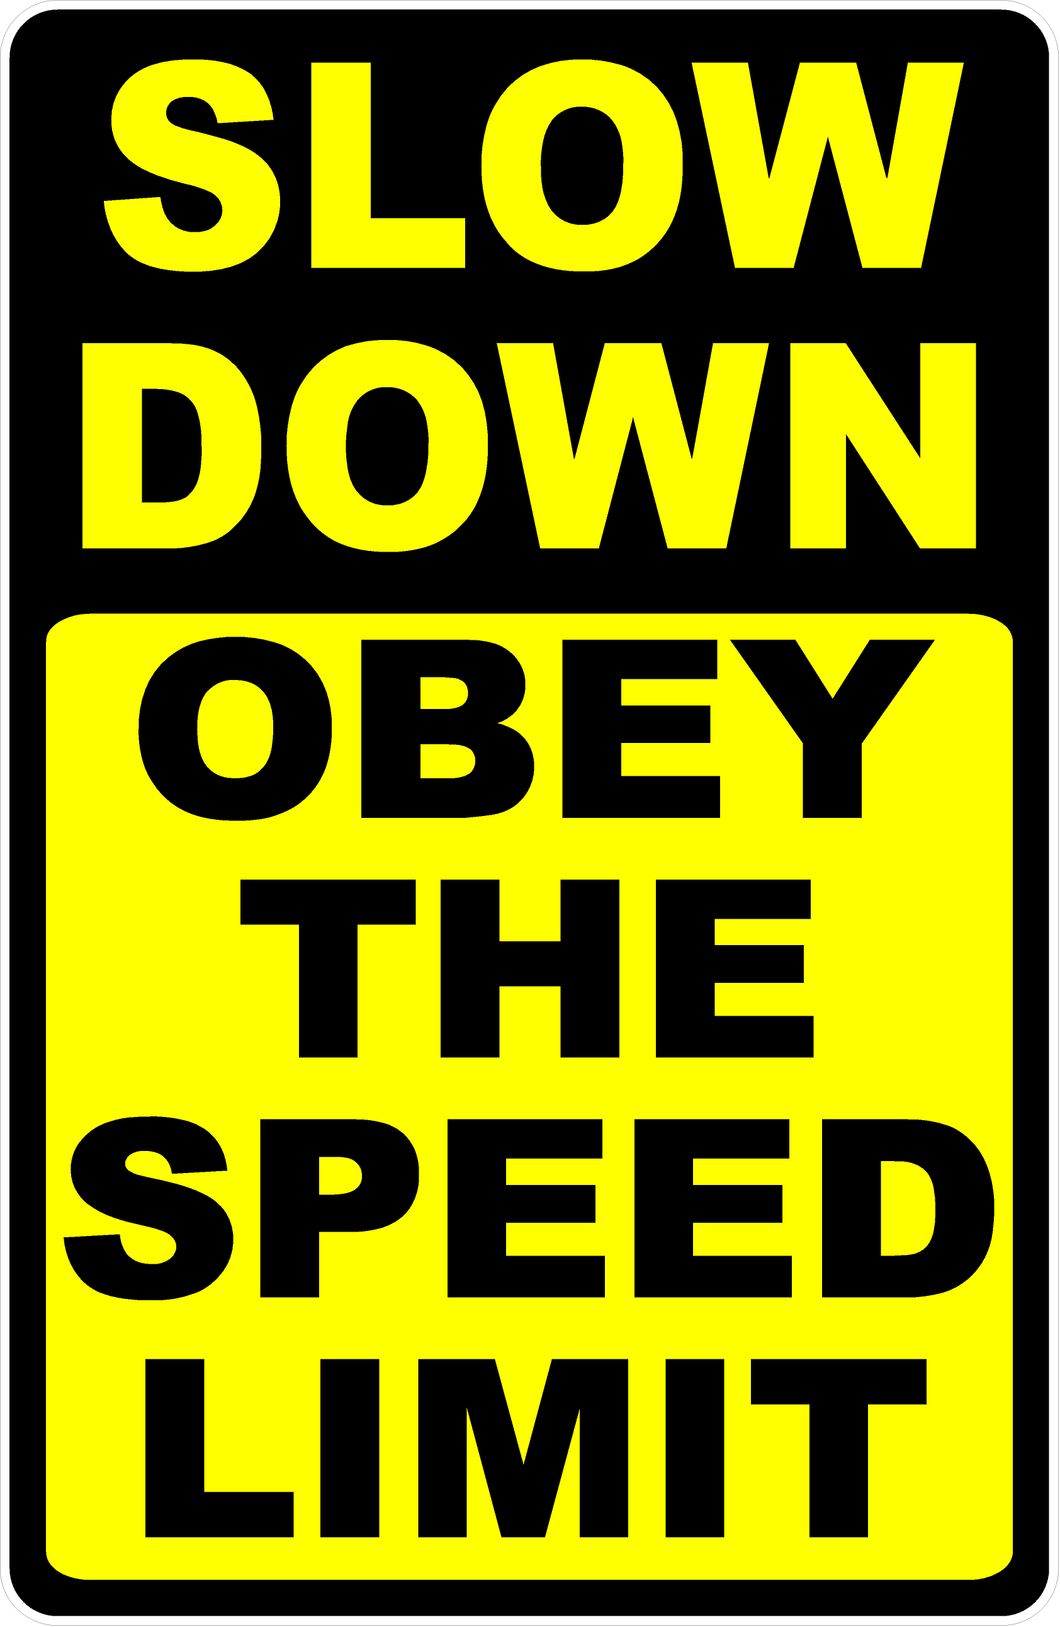 Slow Down Obey Speed Limit Sign